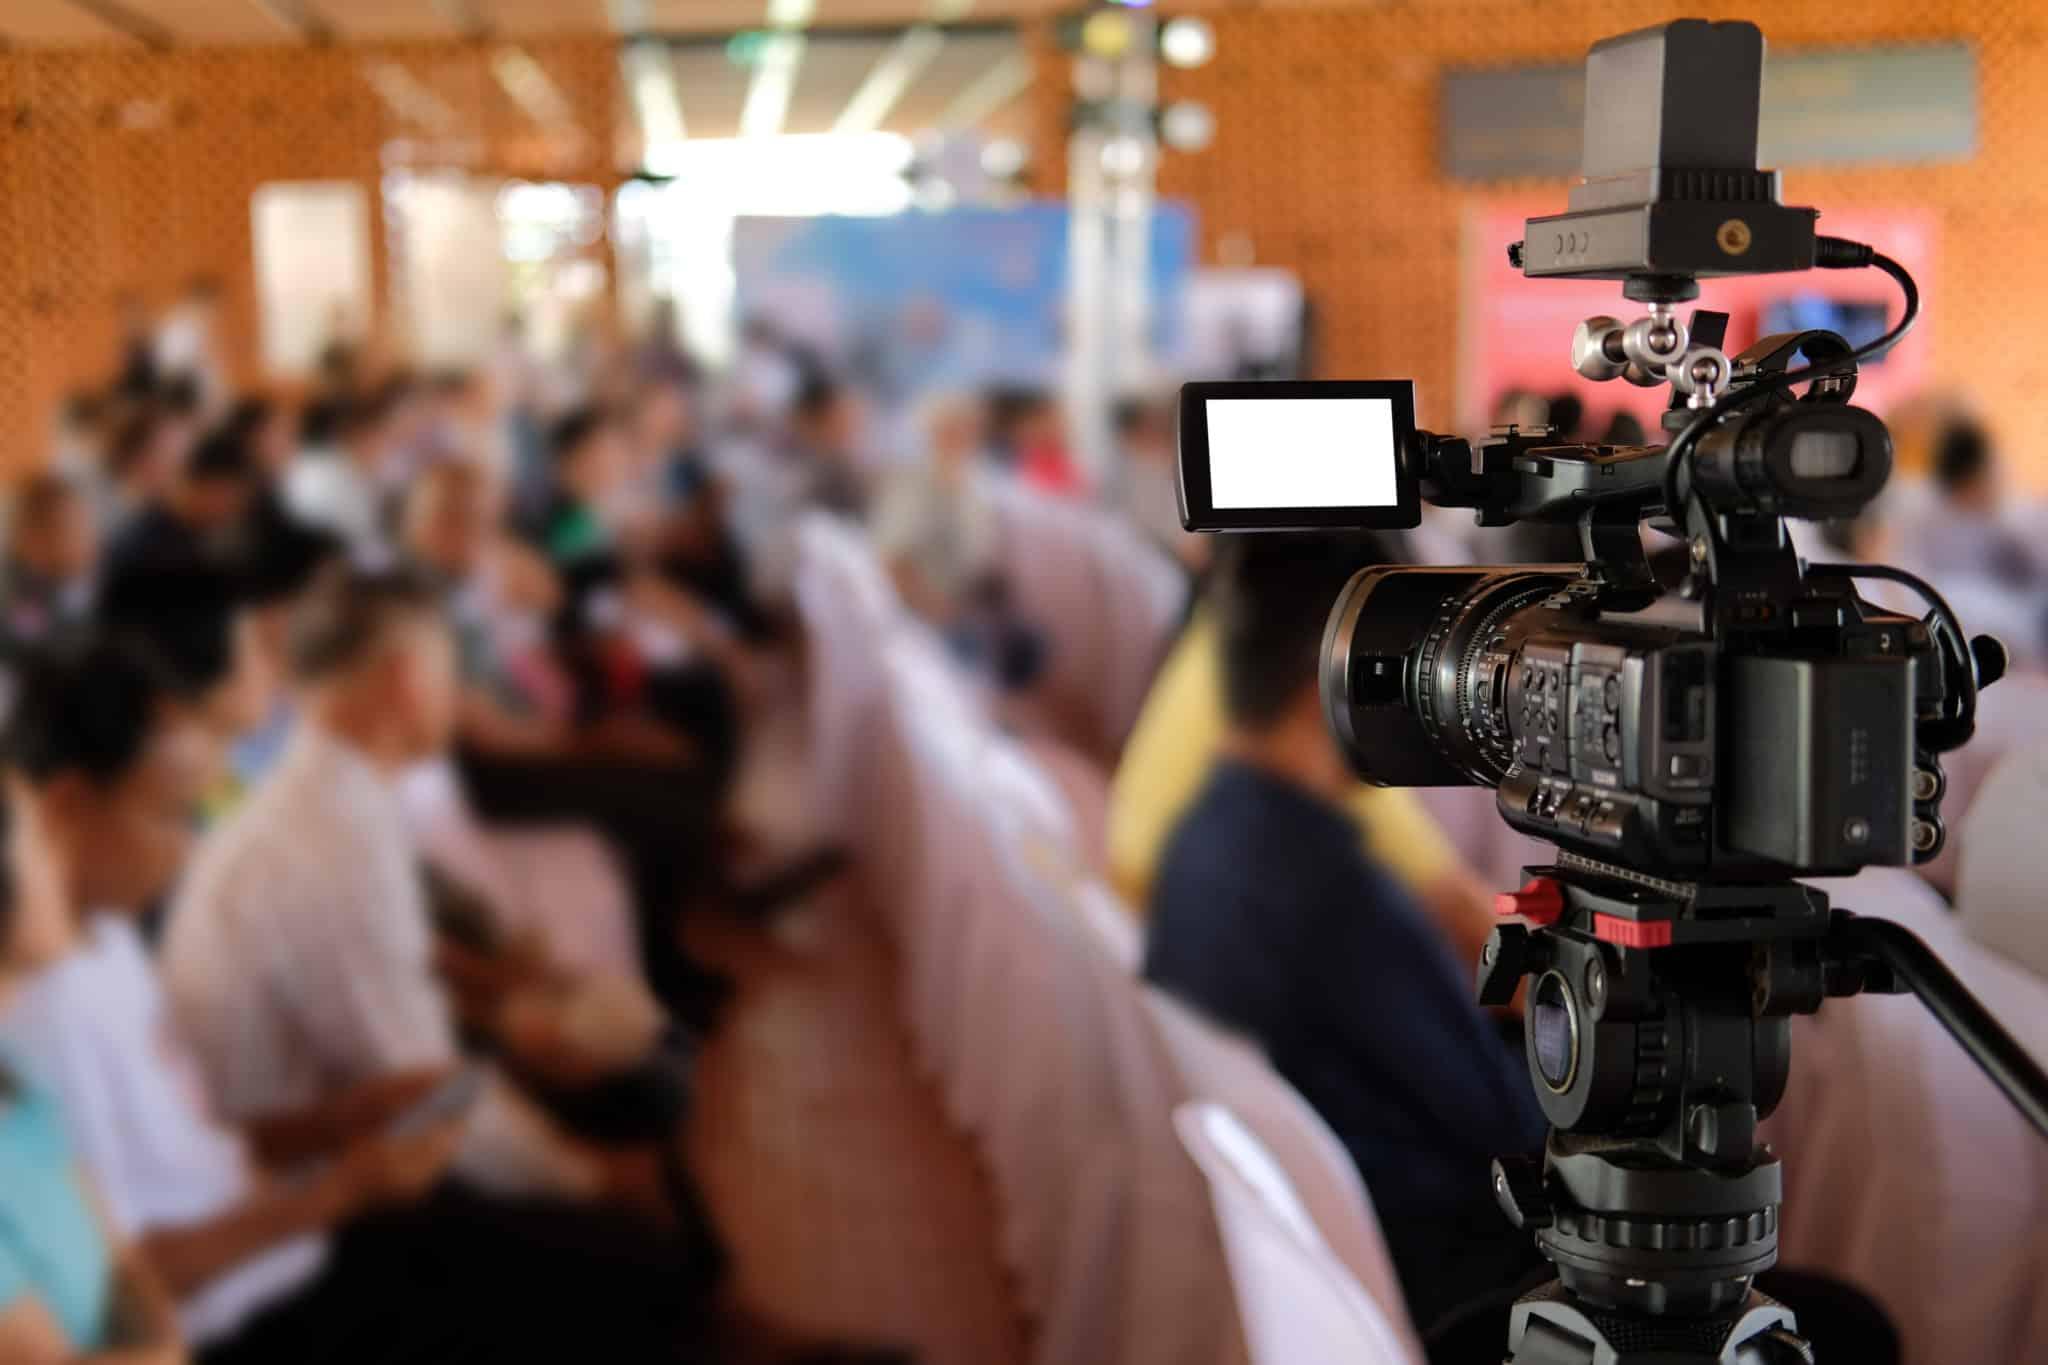 An image of a camera recording in the right foreground of the image with a group of people gathered in a hall in the background for customer spotlight blog.